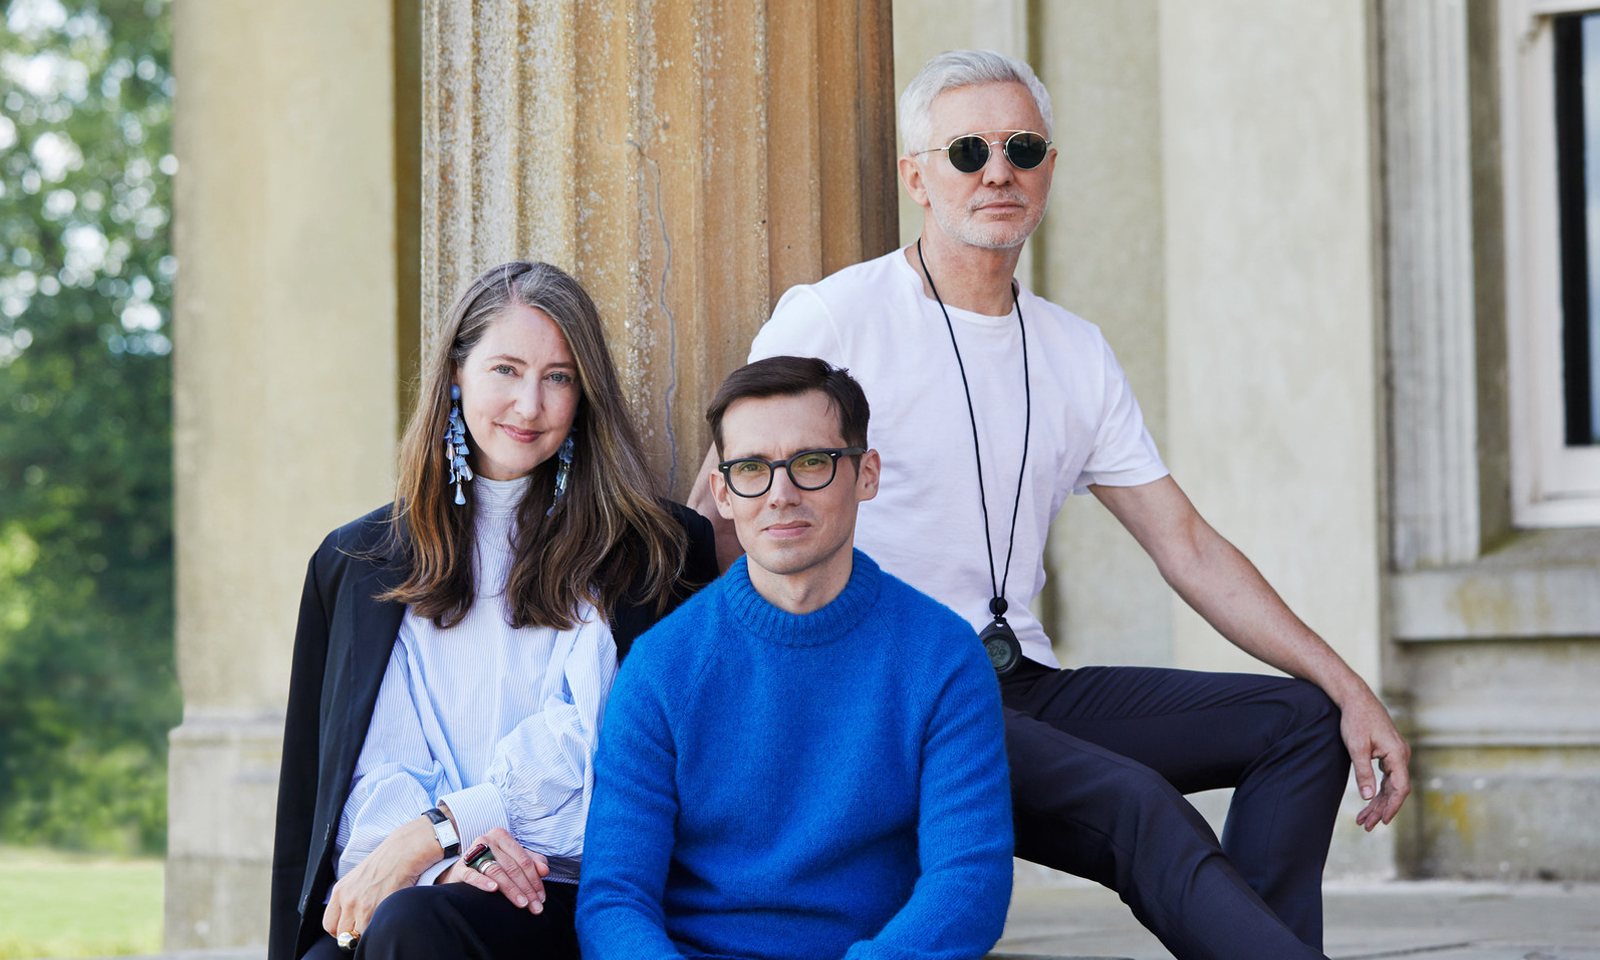 HM announced a designer collaboration with Erdem and filmmaker Baz Luhrmann to tell the story.